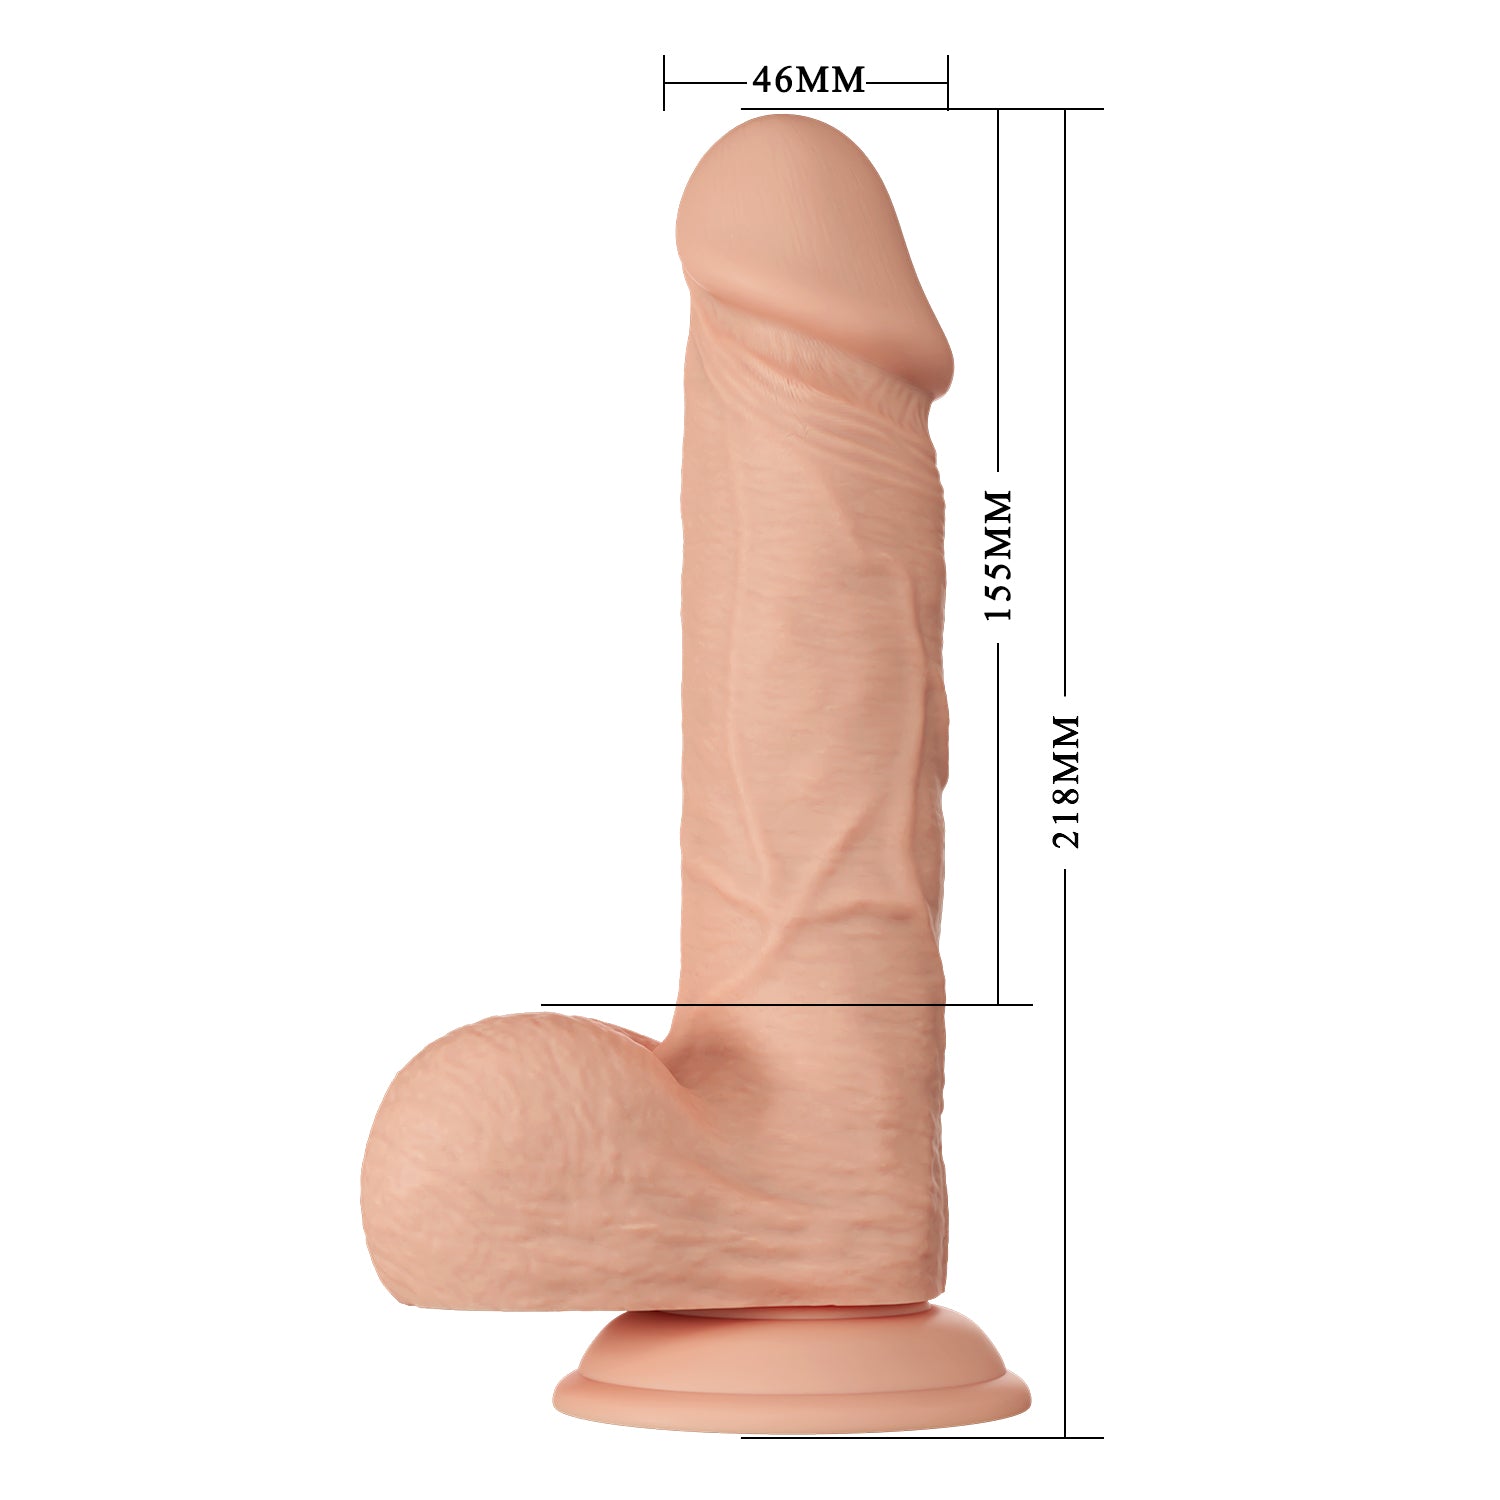 Baile 8.5 Inch Lifelike Dildo With Suction Cup In Flesh